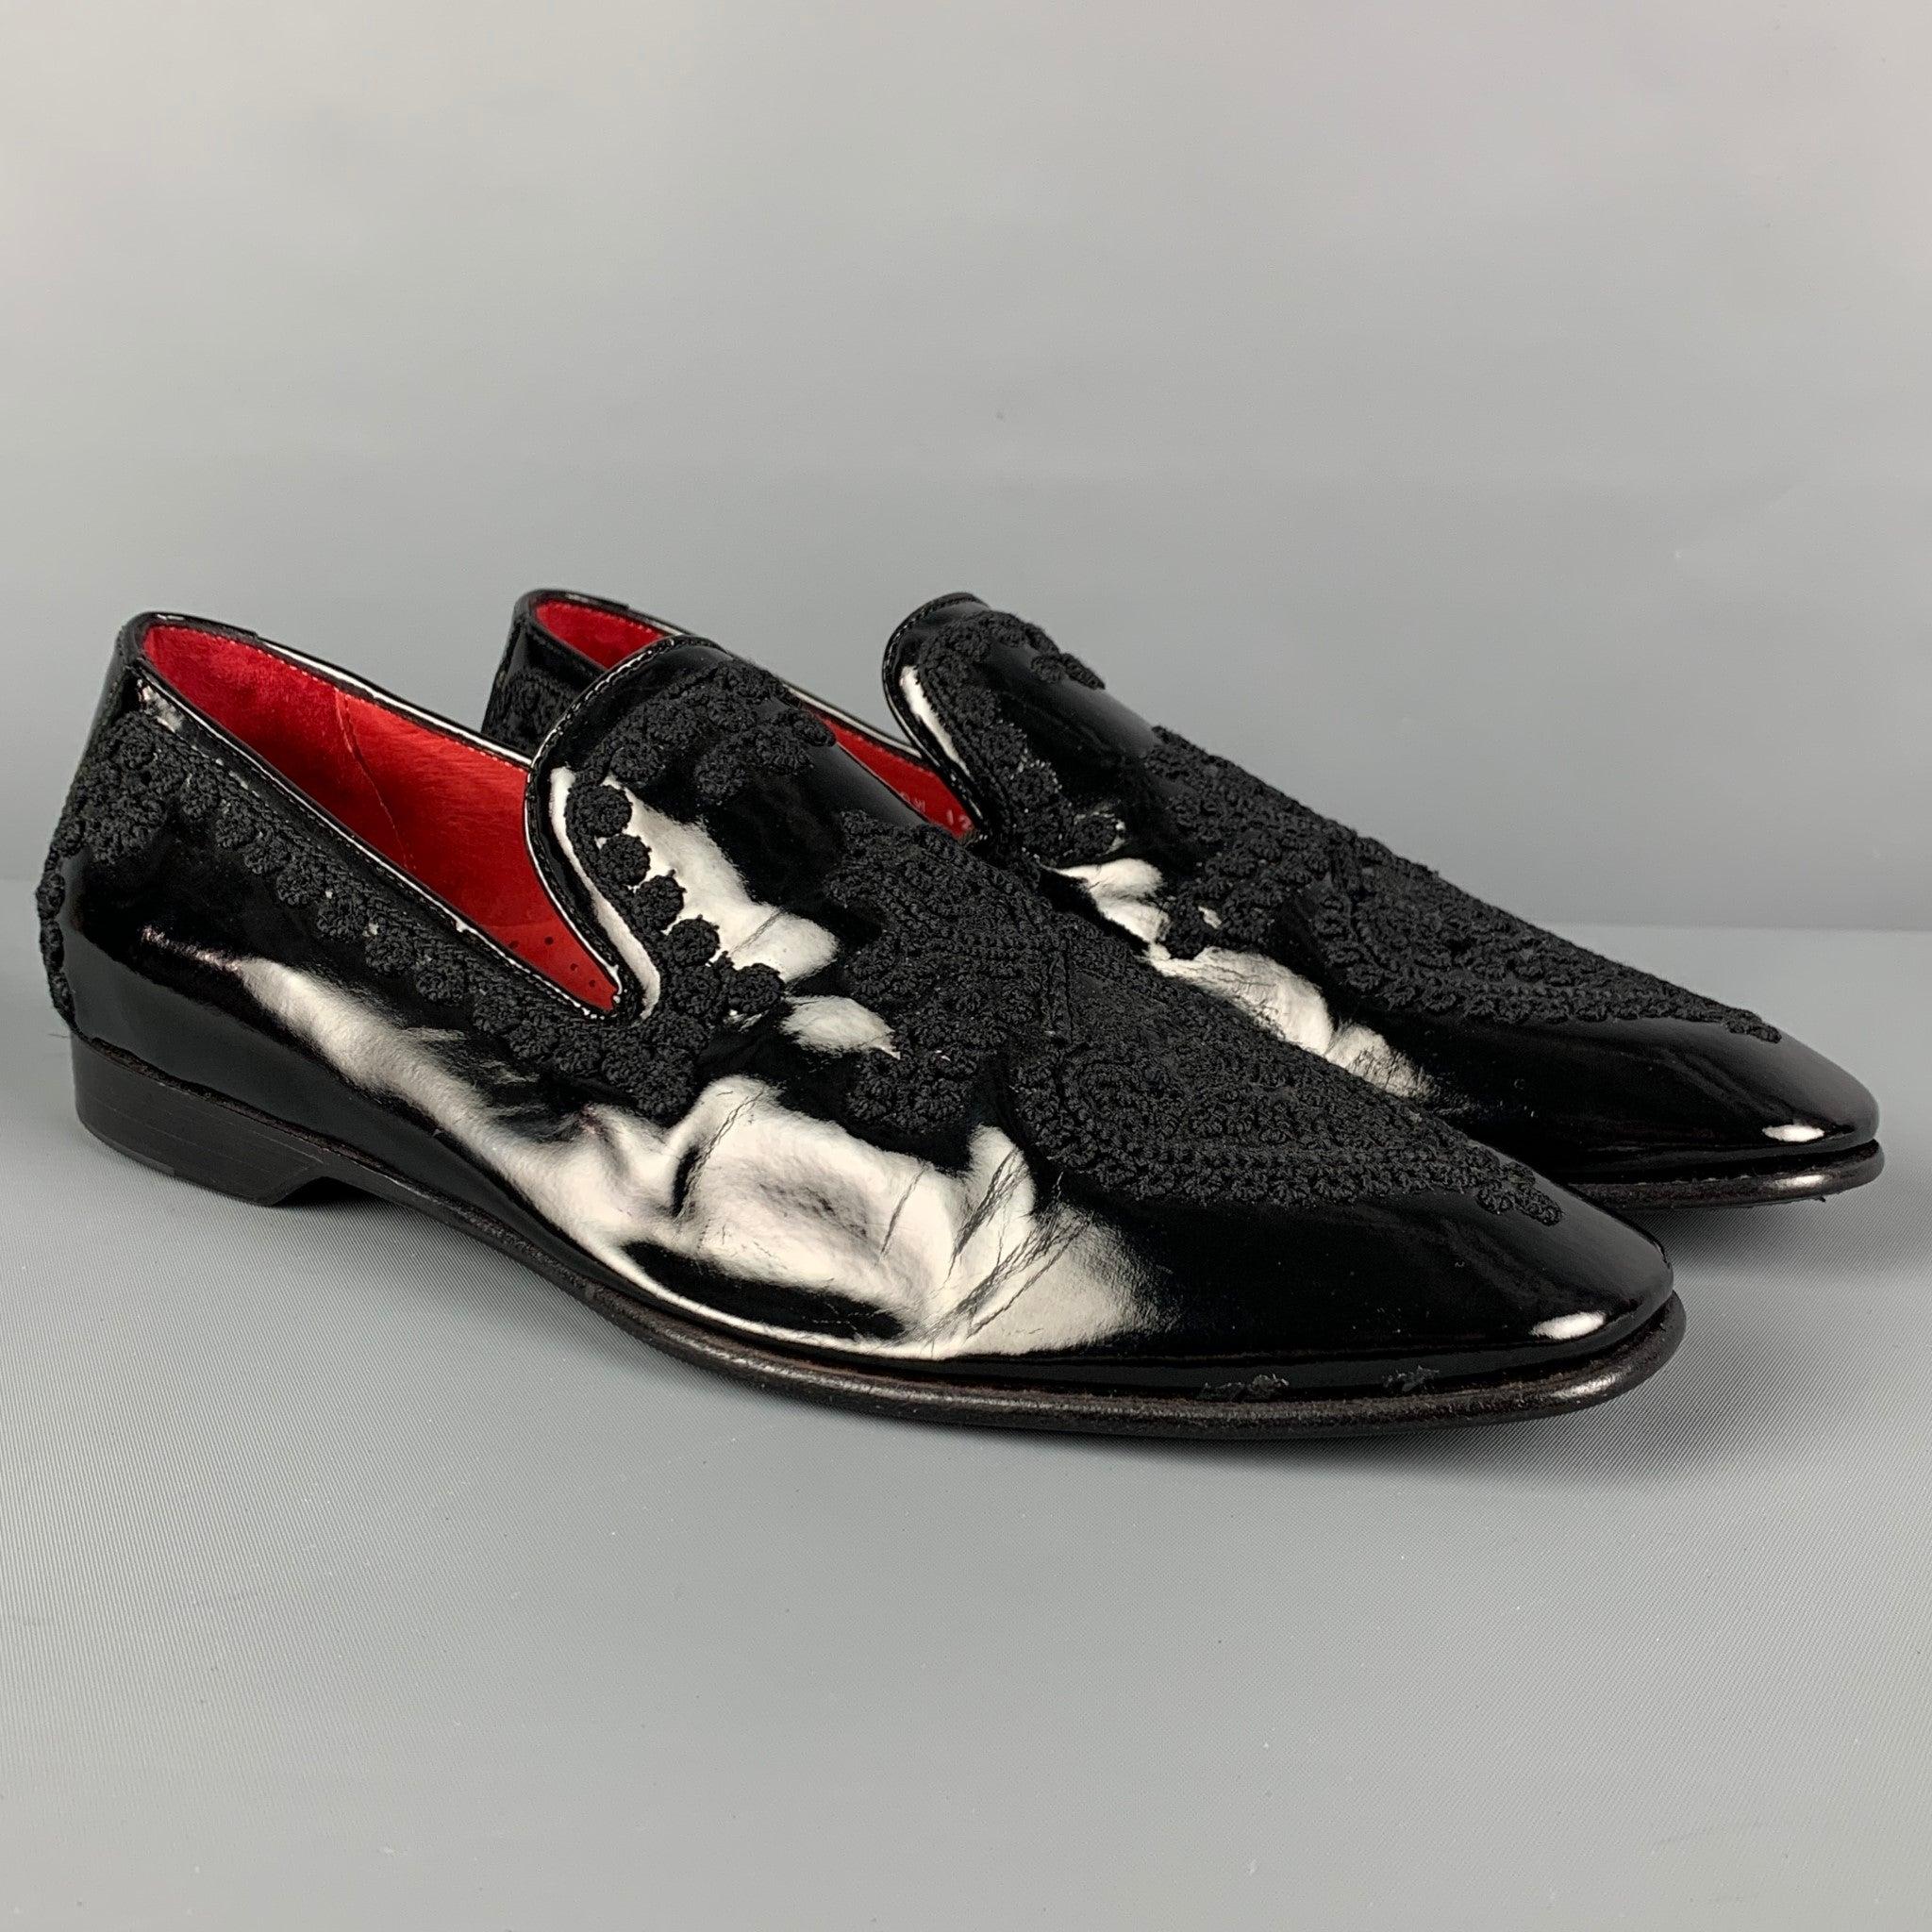 DONALD J PLINER SIGNATURE loafers comes in a black patent leather featuring applique details, square toe, and a slip on style. Made in Italy.
Very Good
Pre-Owned Condition. Light wear.  

Marked:   9 MOutsole: 11.75 inches  x 3.75 inches 
  
  
